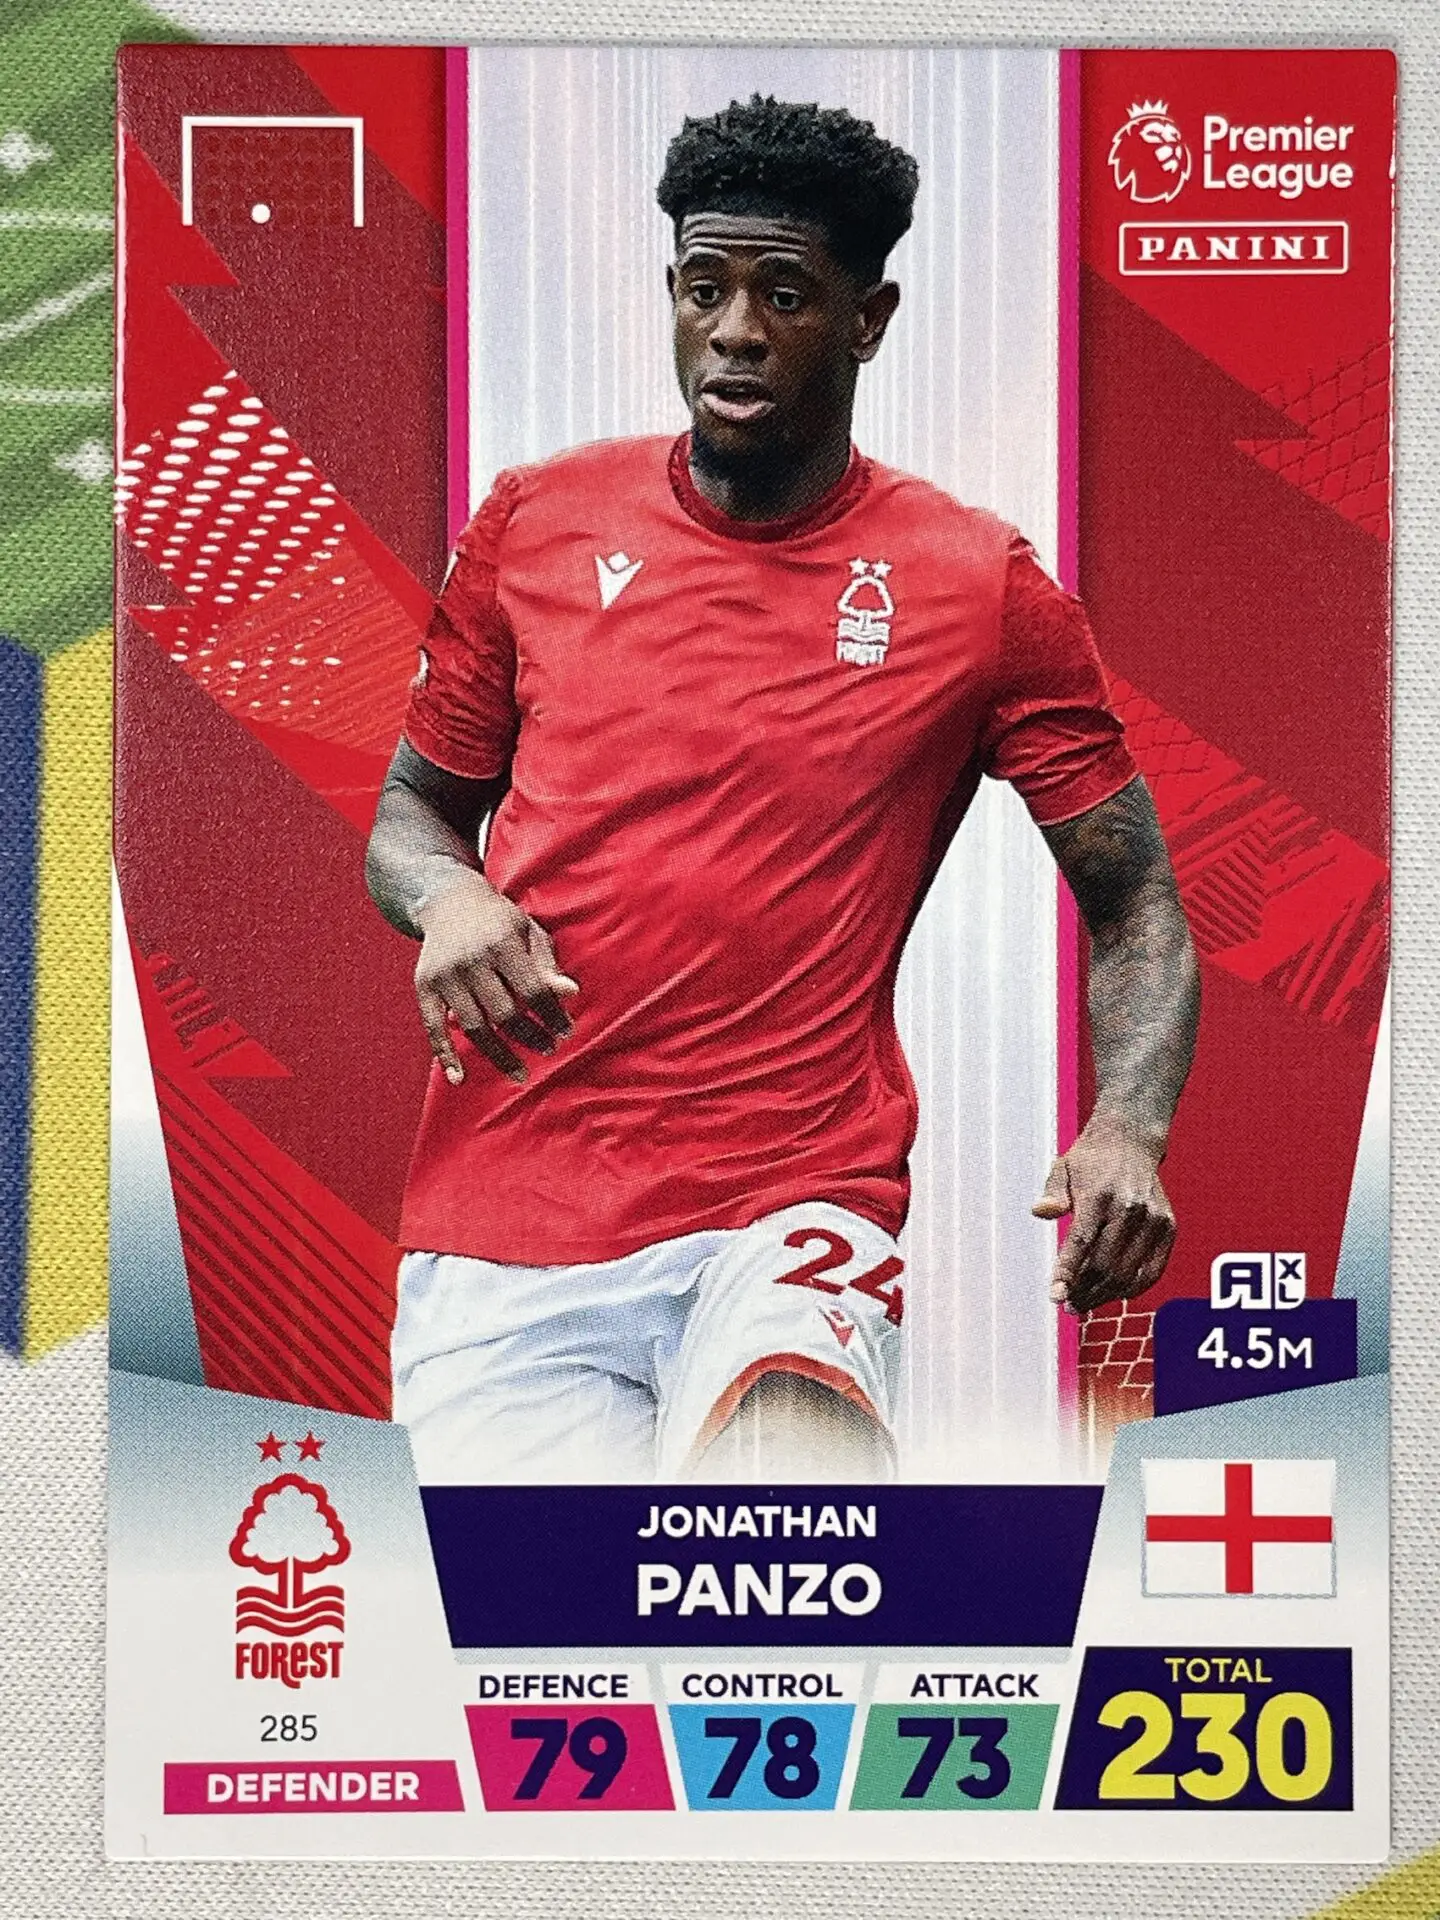 Panini relaunches Adrenalyn XL trading cards ahead of new football